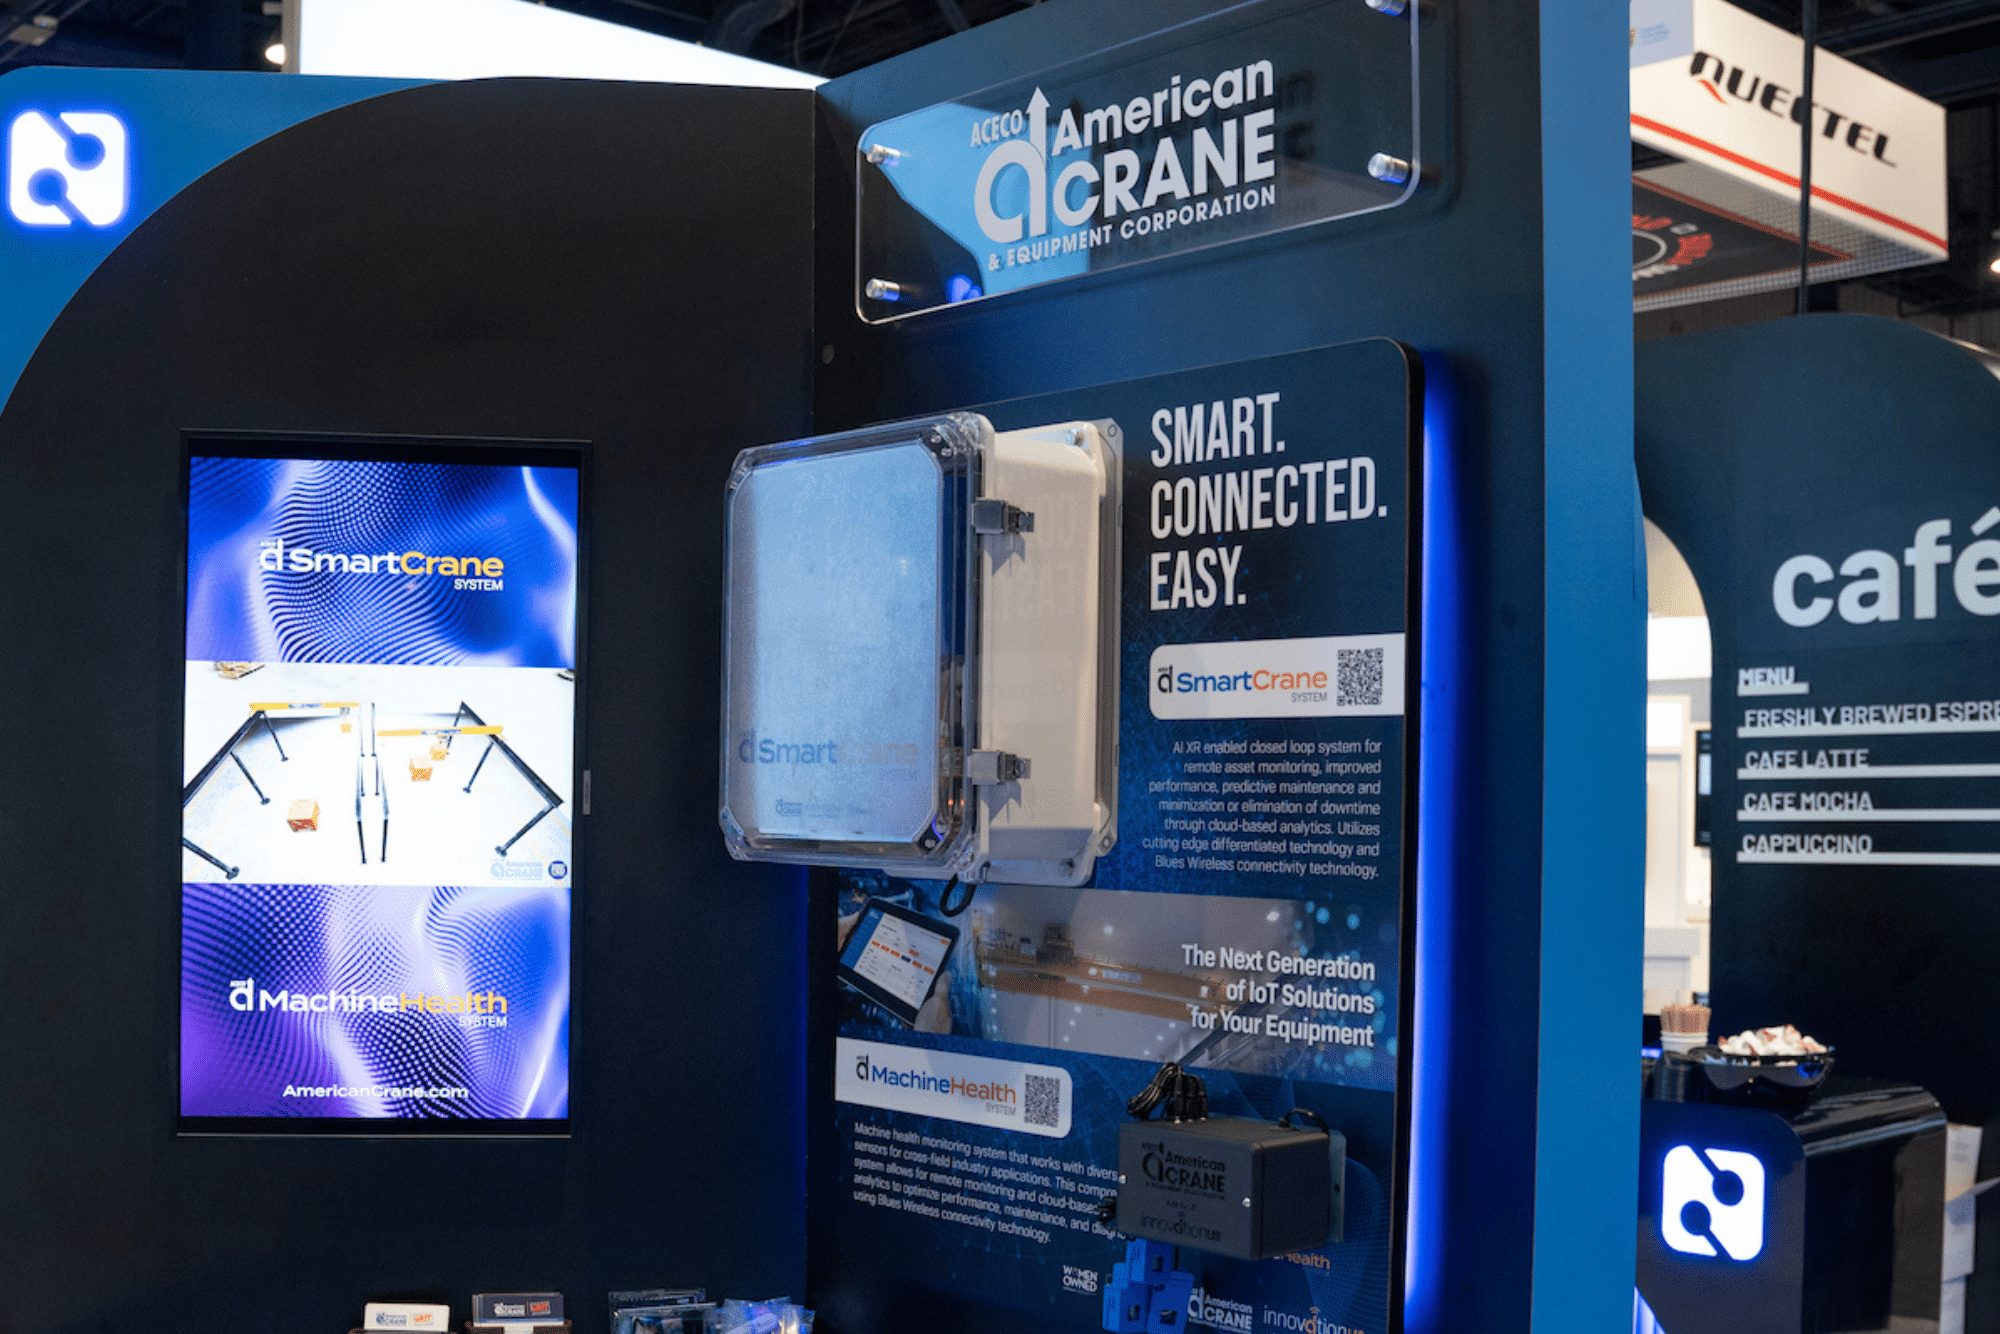 American Crane & Equipment Corporation interactive IIoT Smart Crane System and Machine Health System as part of the Blues customer showcase at CES 2023.